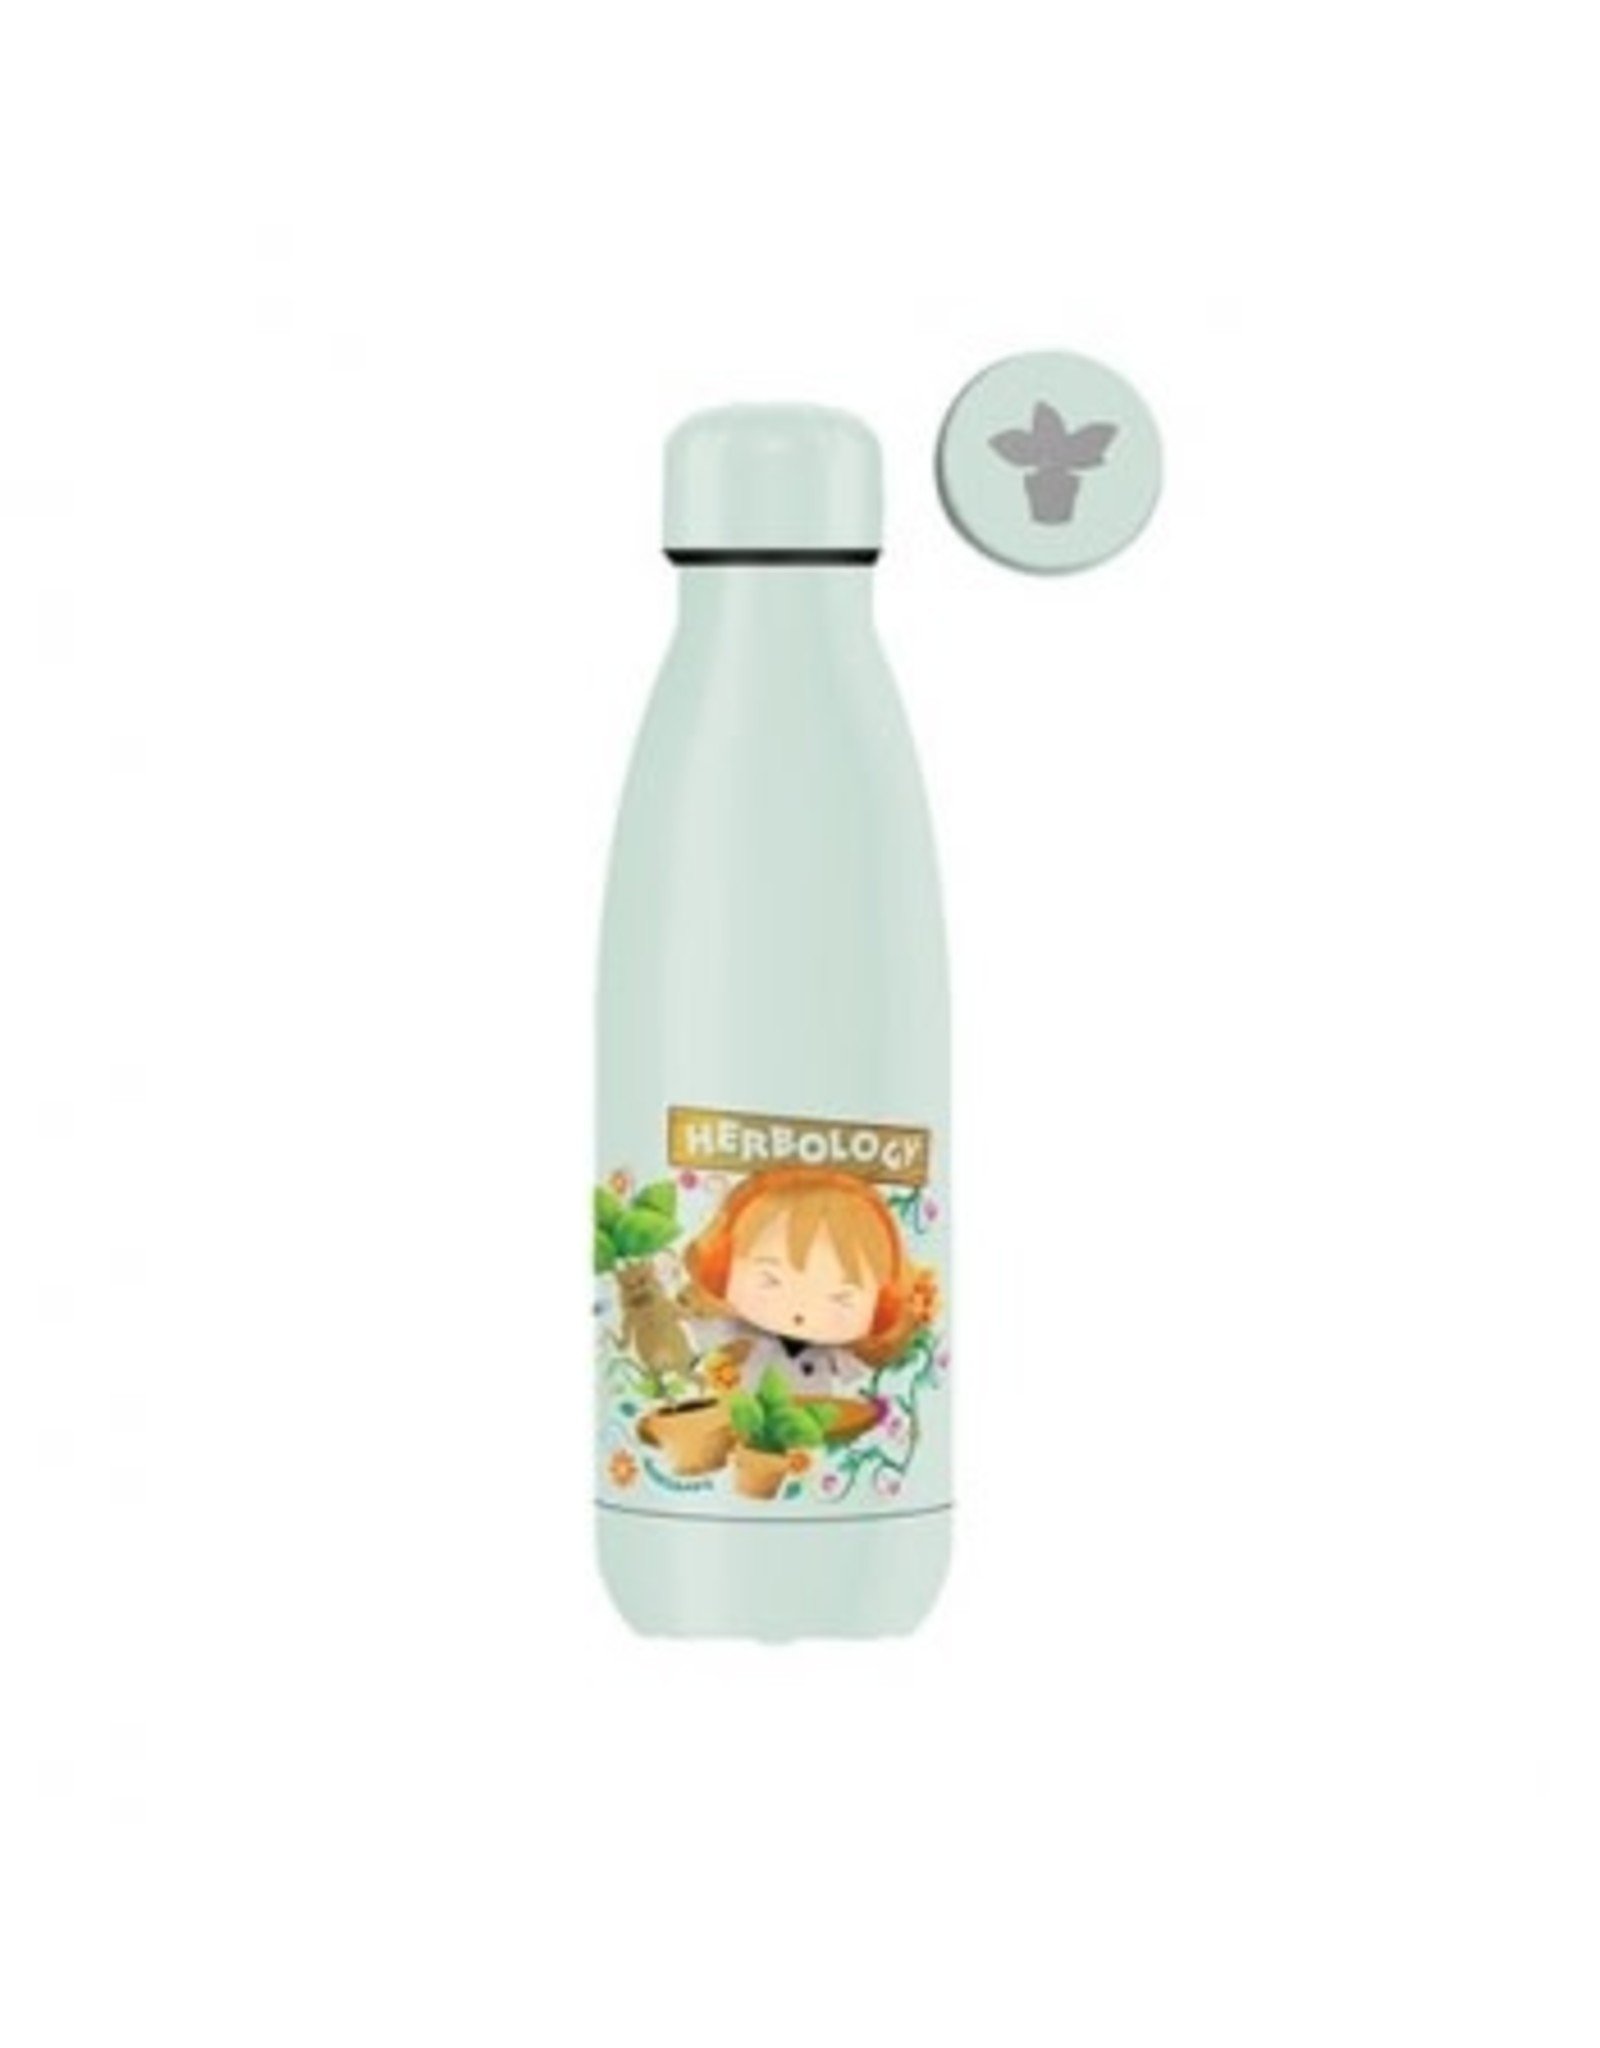 HARRY POTTER Insulated bottle 350ml - Hermione and Mandrake